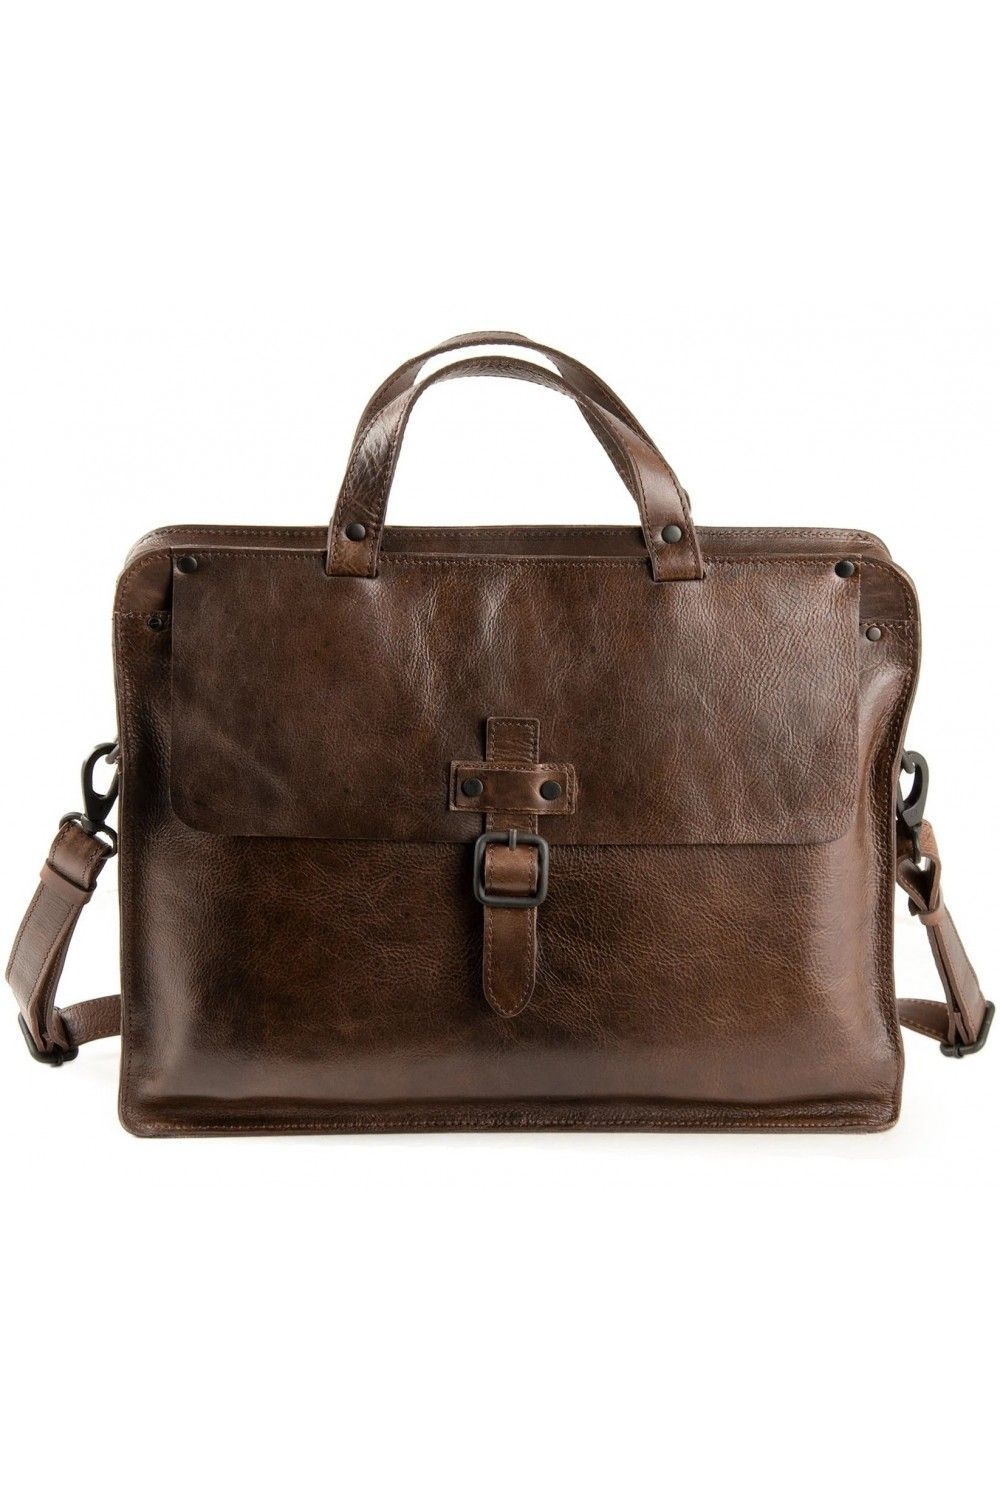 Harolds Aberdeen business bag S brown leather